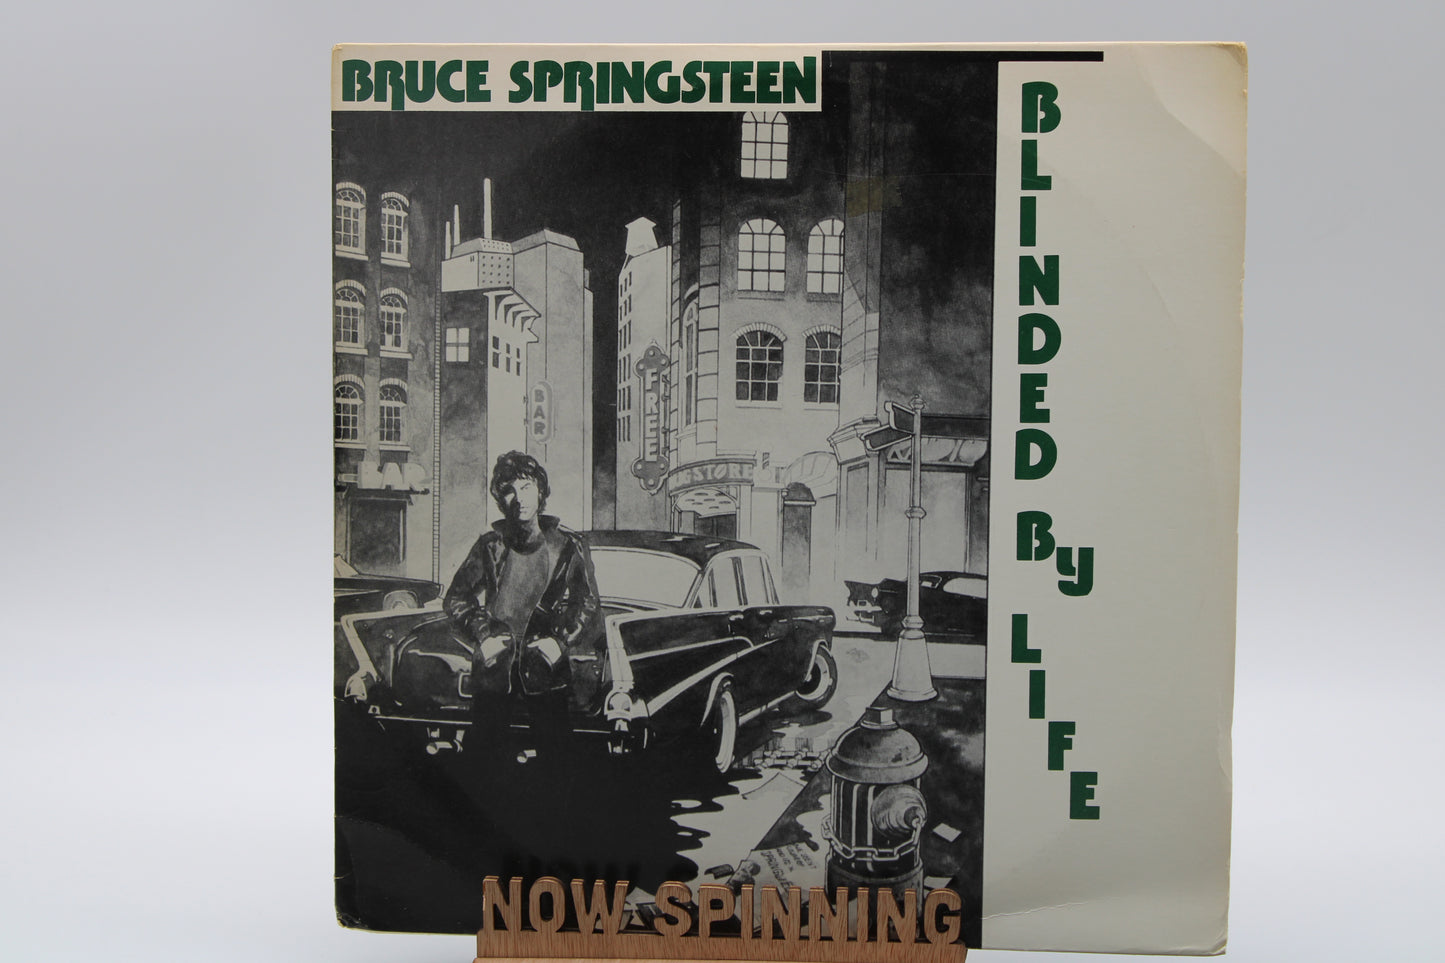 Bruce Springsteen - Blinded by Life - 2 LPs Live at Allen Theater Cleveland April 1976 BLV